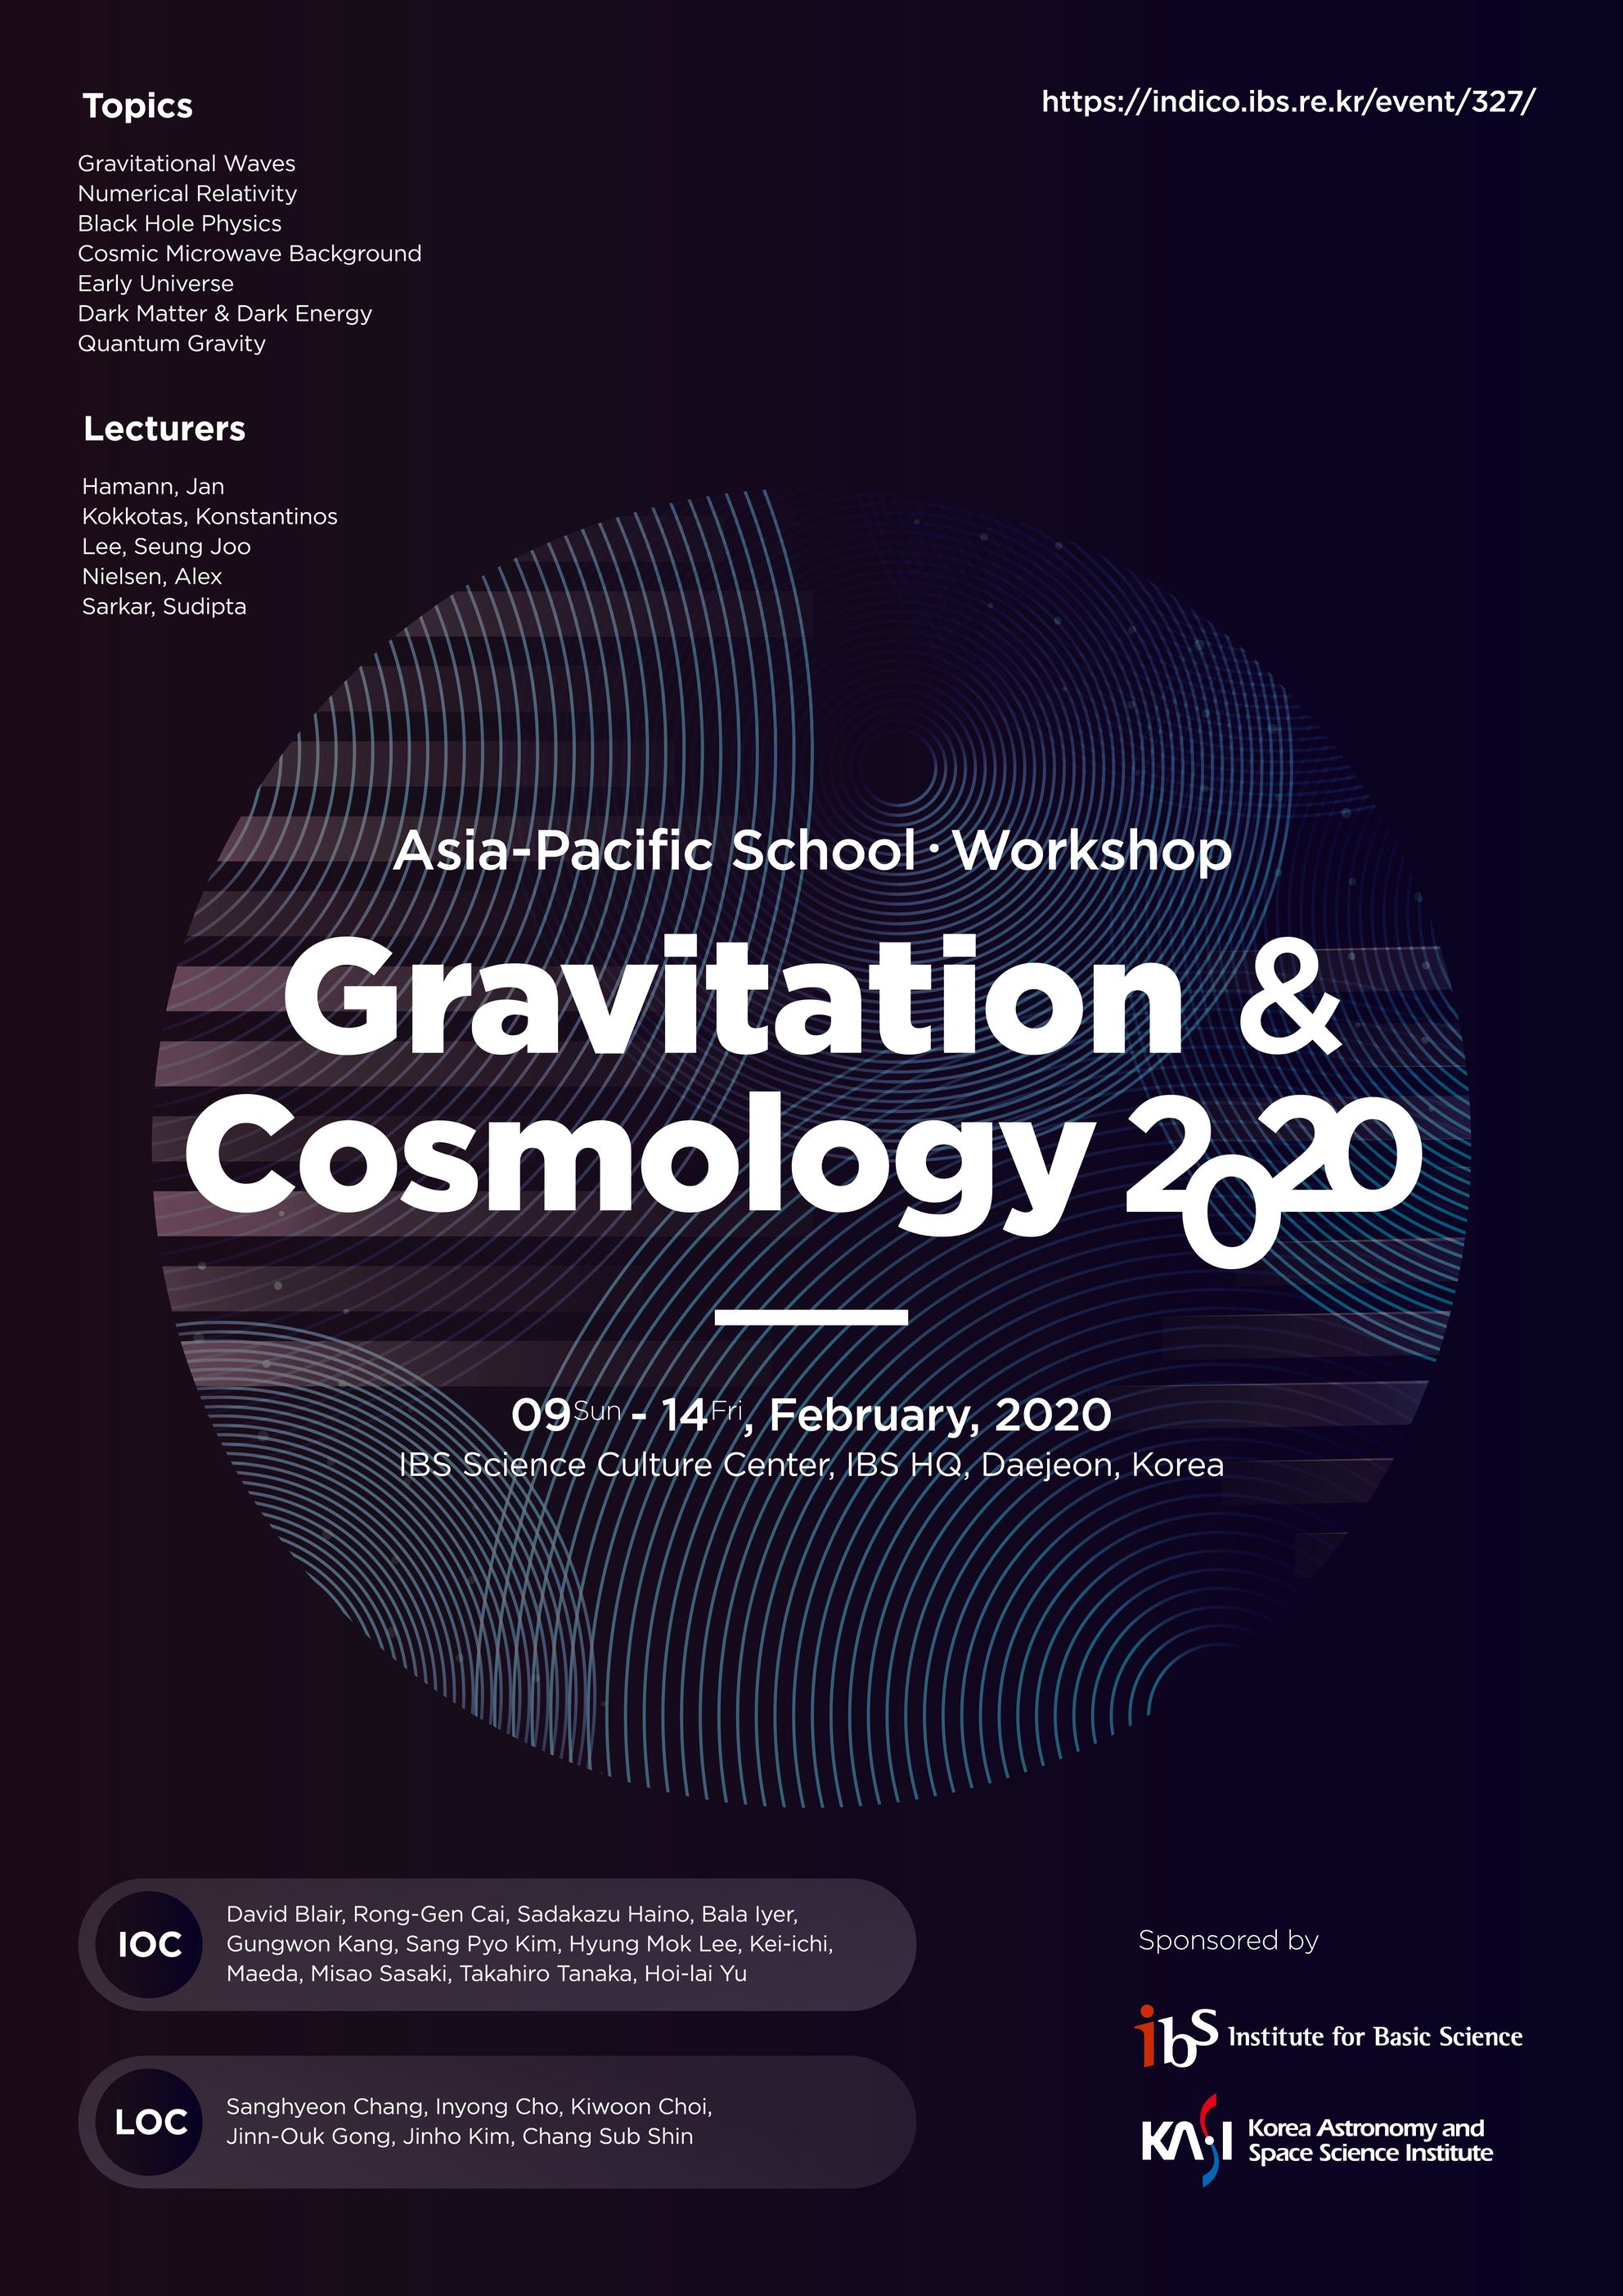 Asia-Pacific School and Workshop on Gravitation and Cosmology 2020 사진